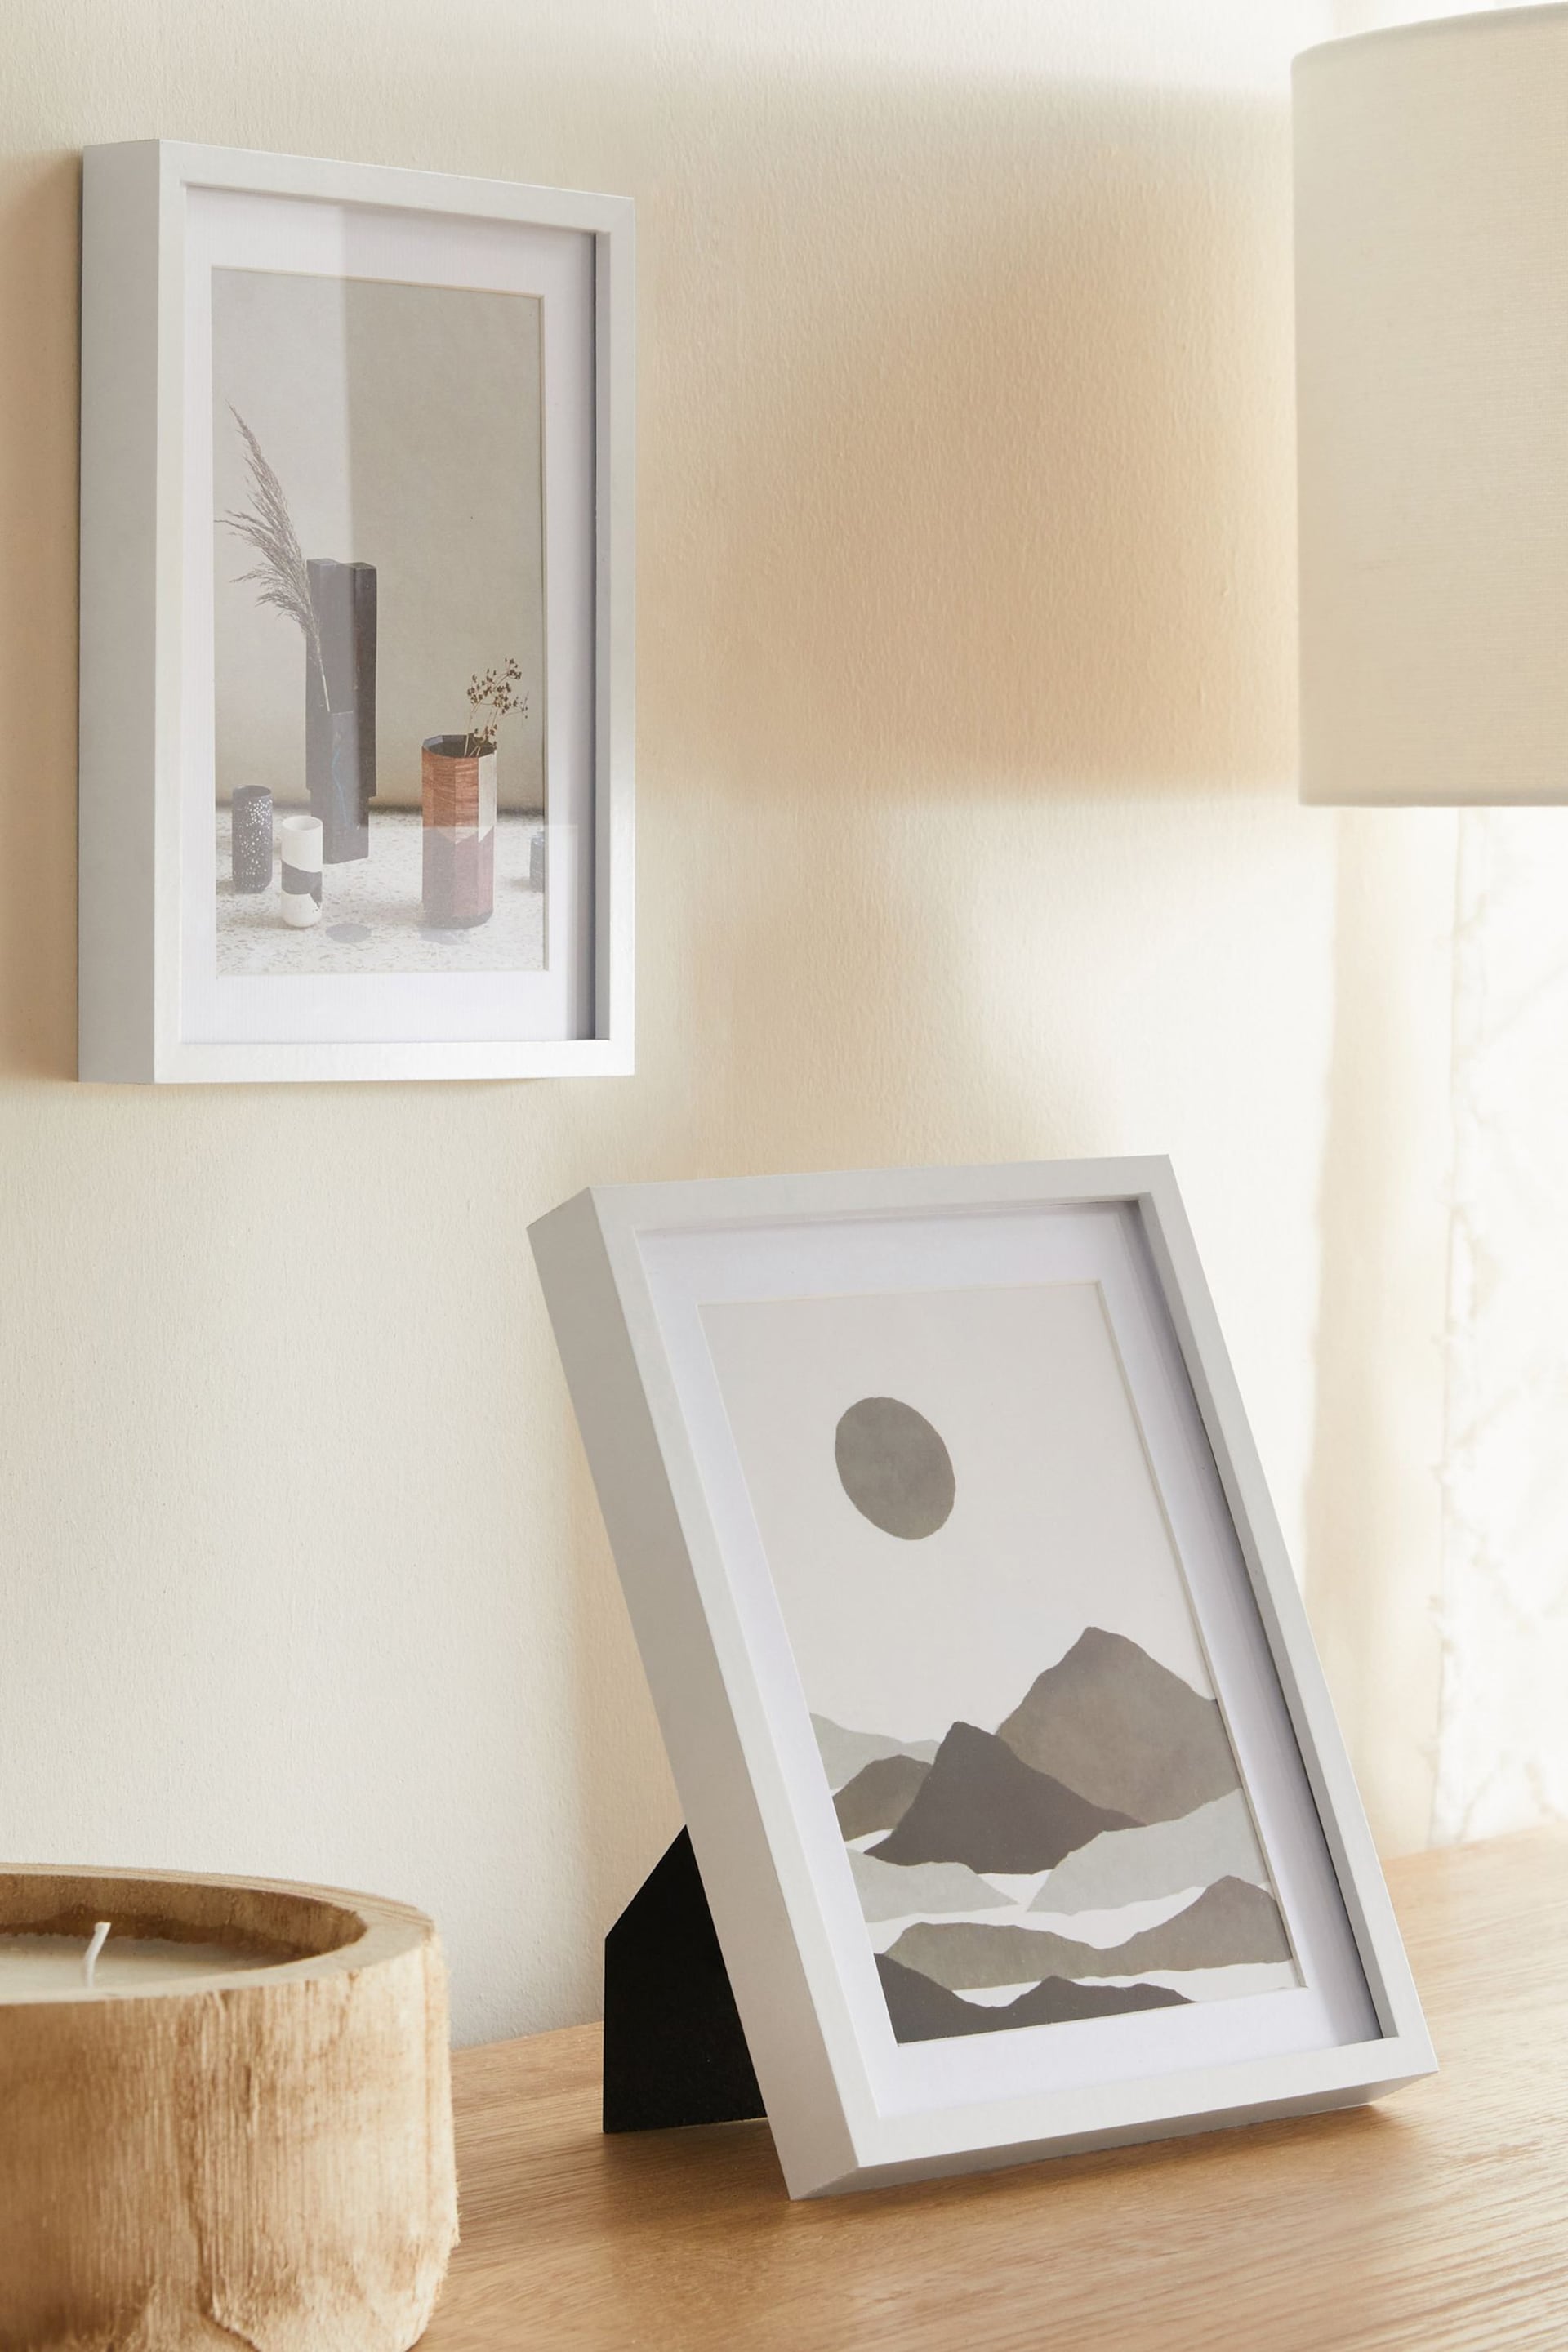 Set of 2 White Parker Picture Frames - Image 2 of 8